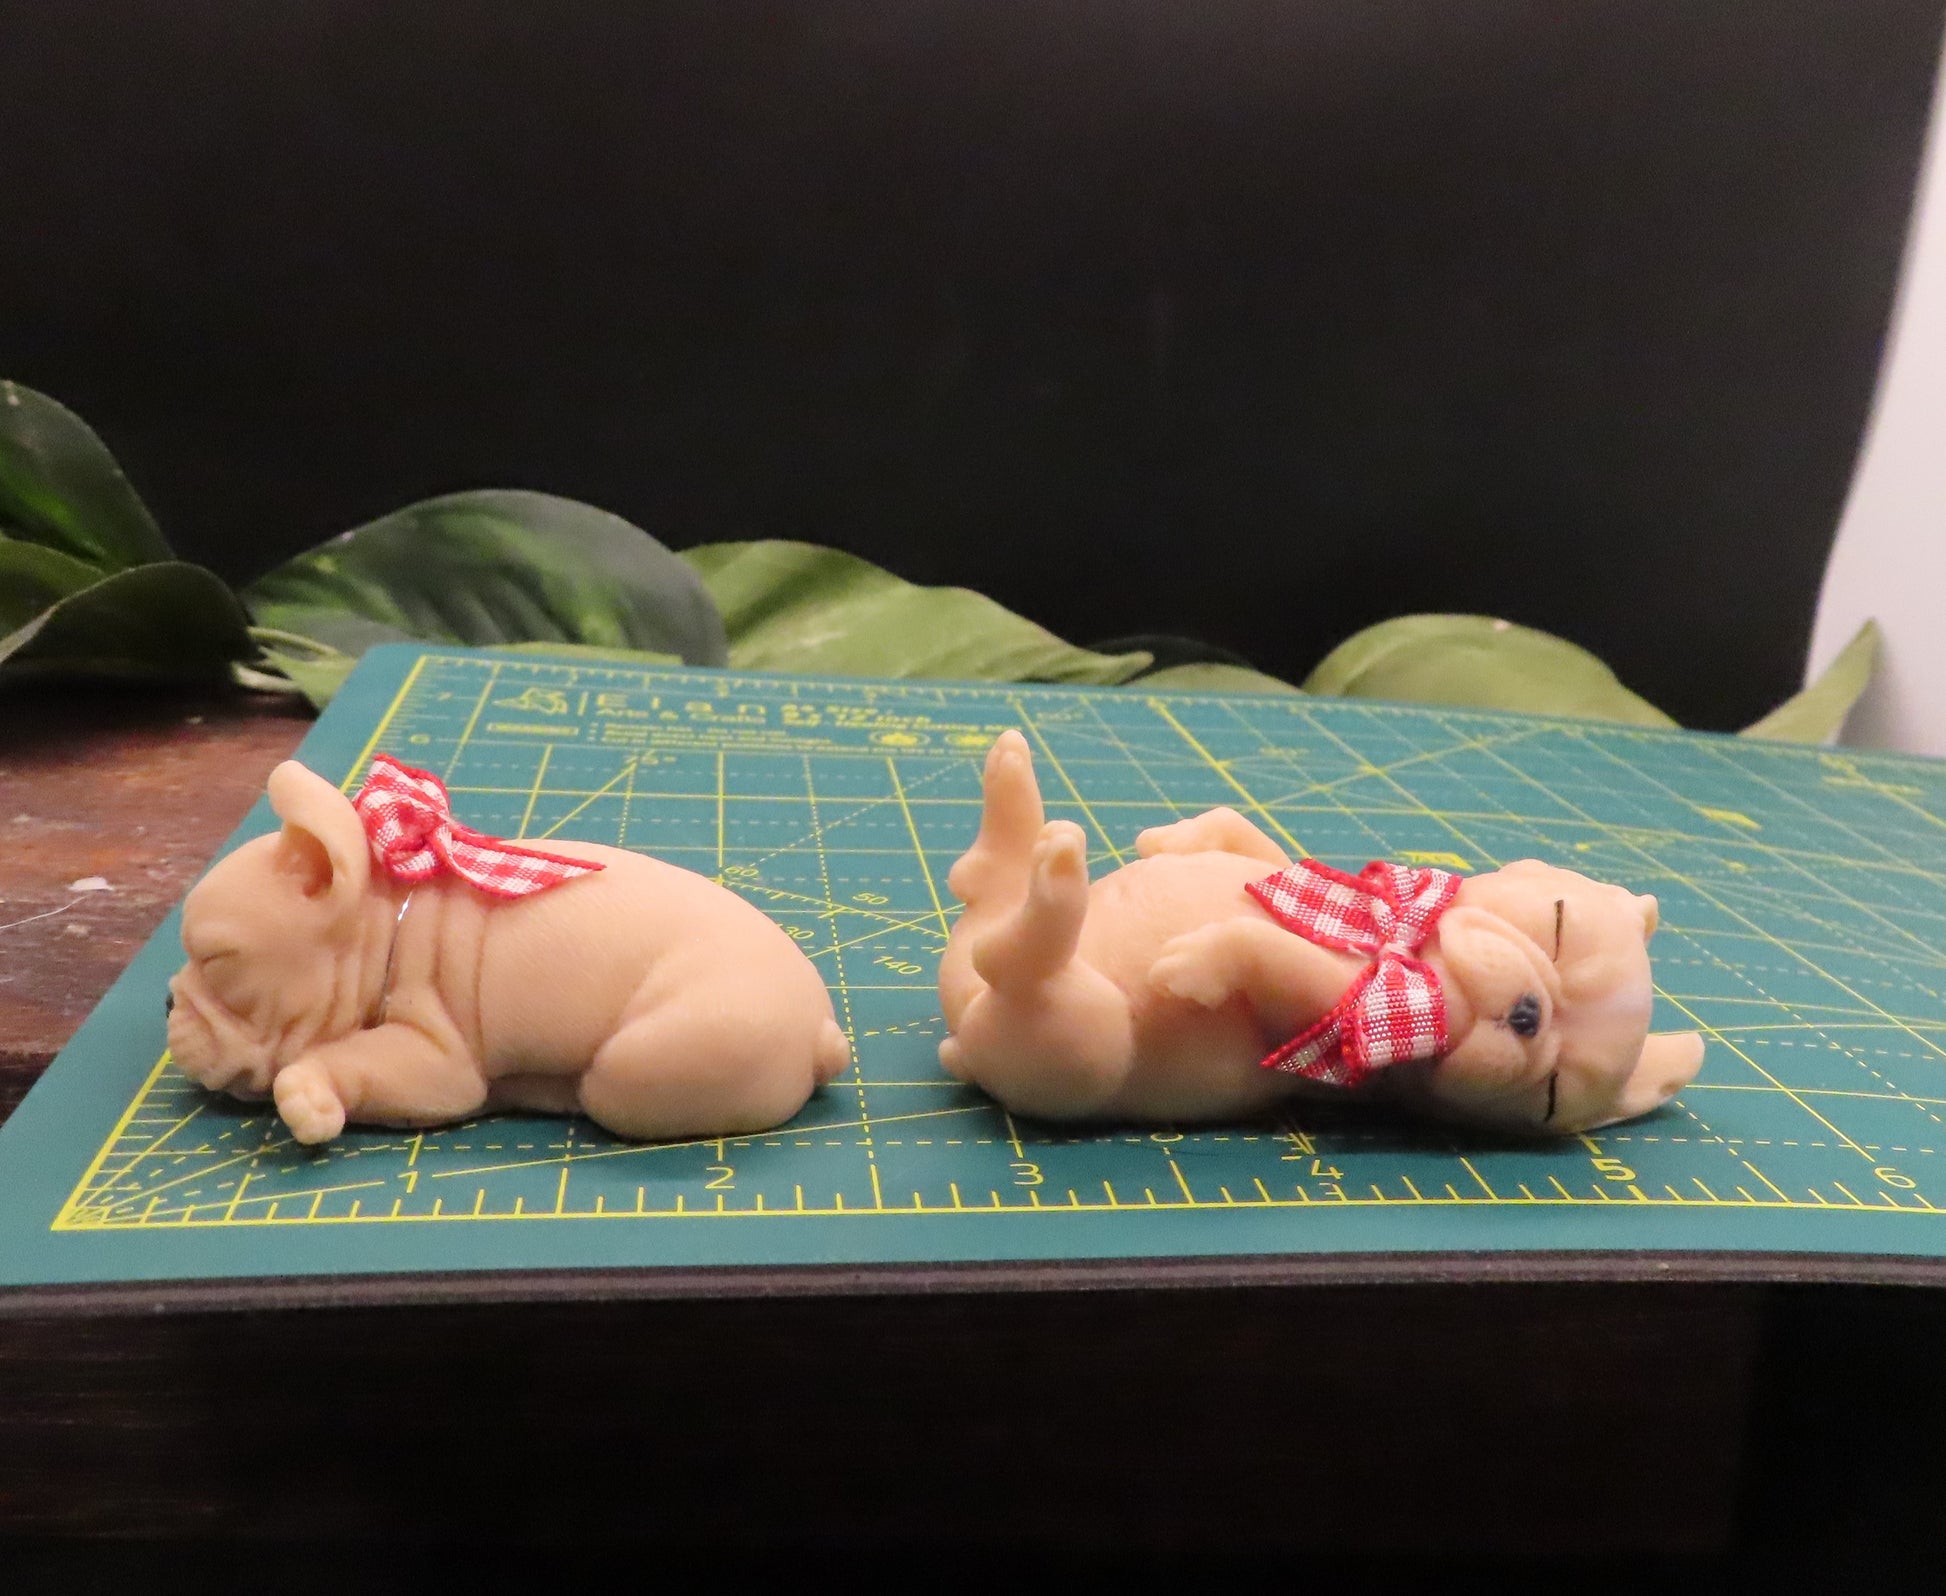 pups on cutting mat, approximately 2.5 inches long